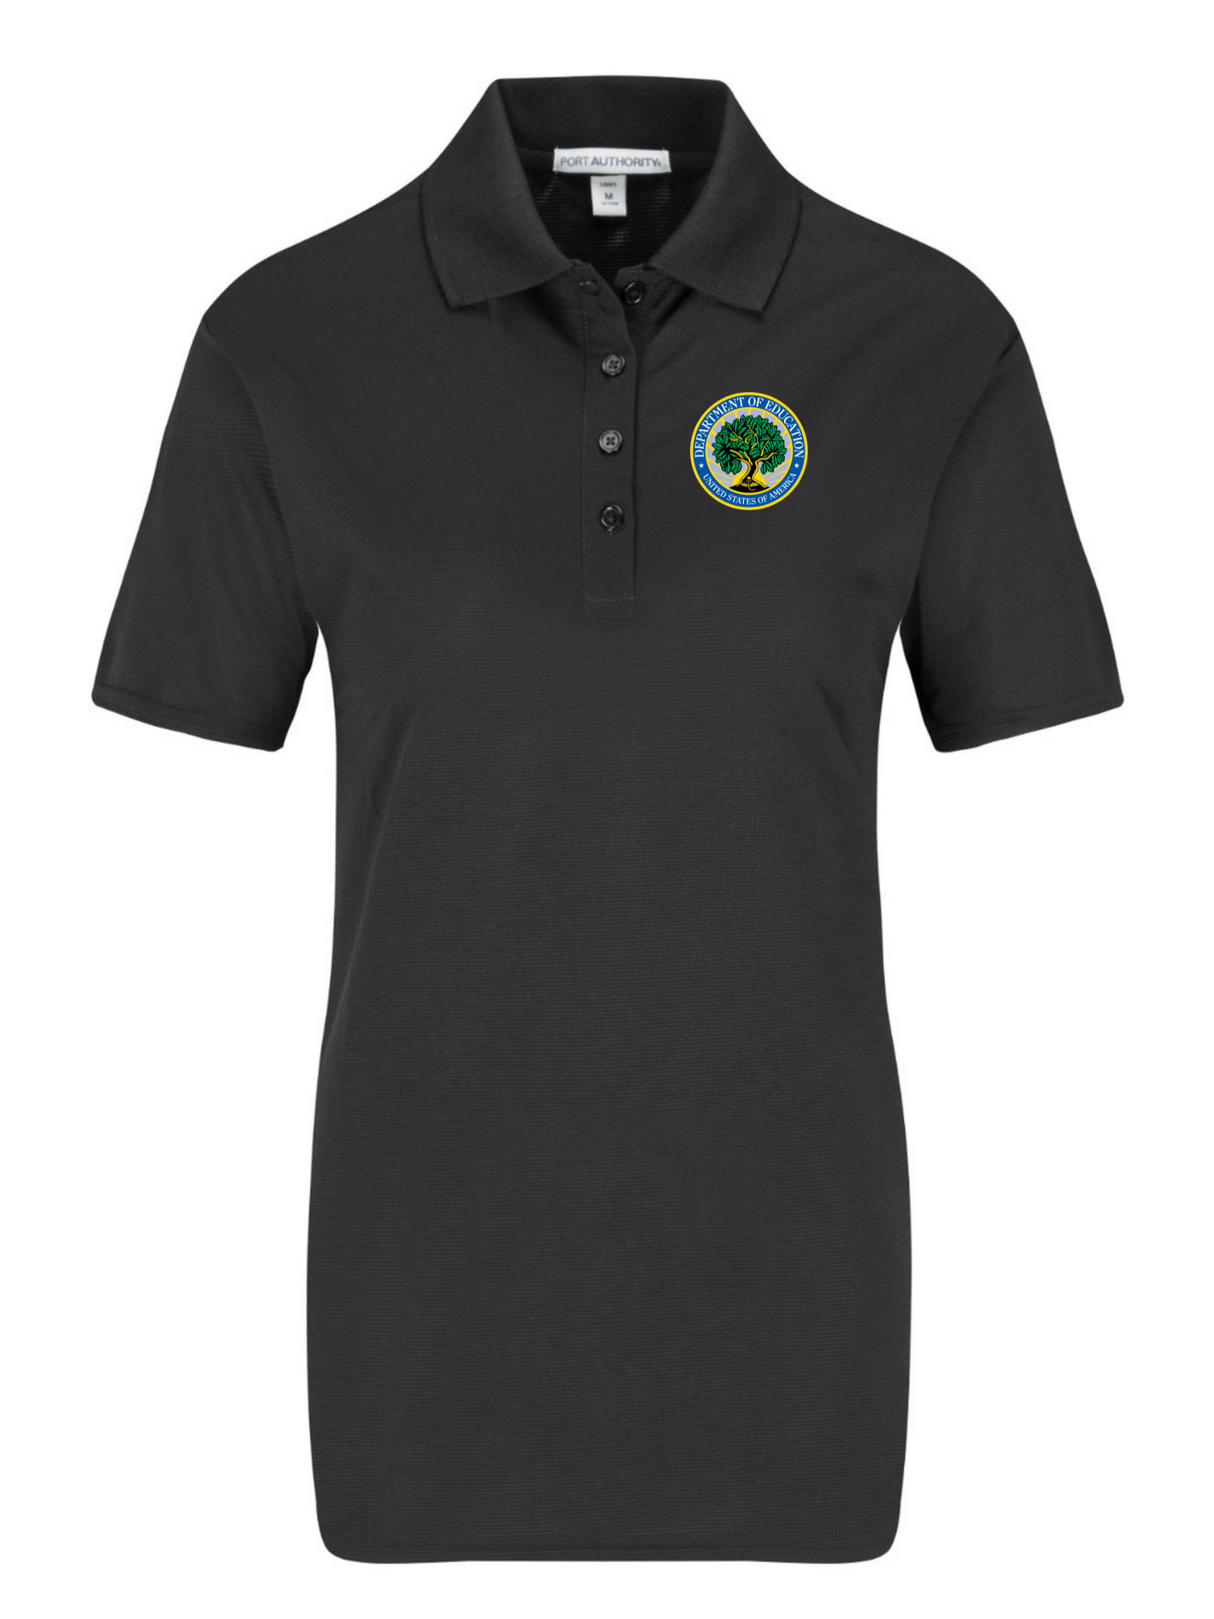 US Department of Education Polo Shirt - Women's Short Sleeve - FEDS Apparel